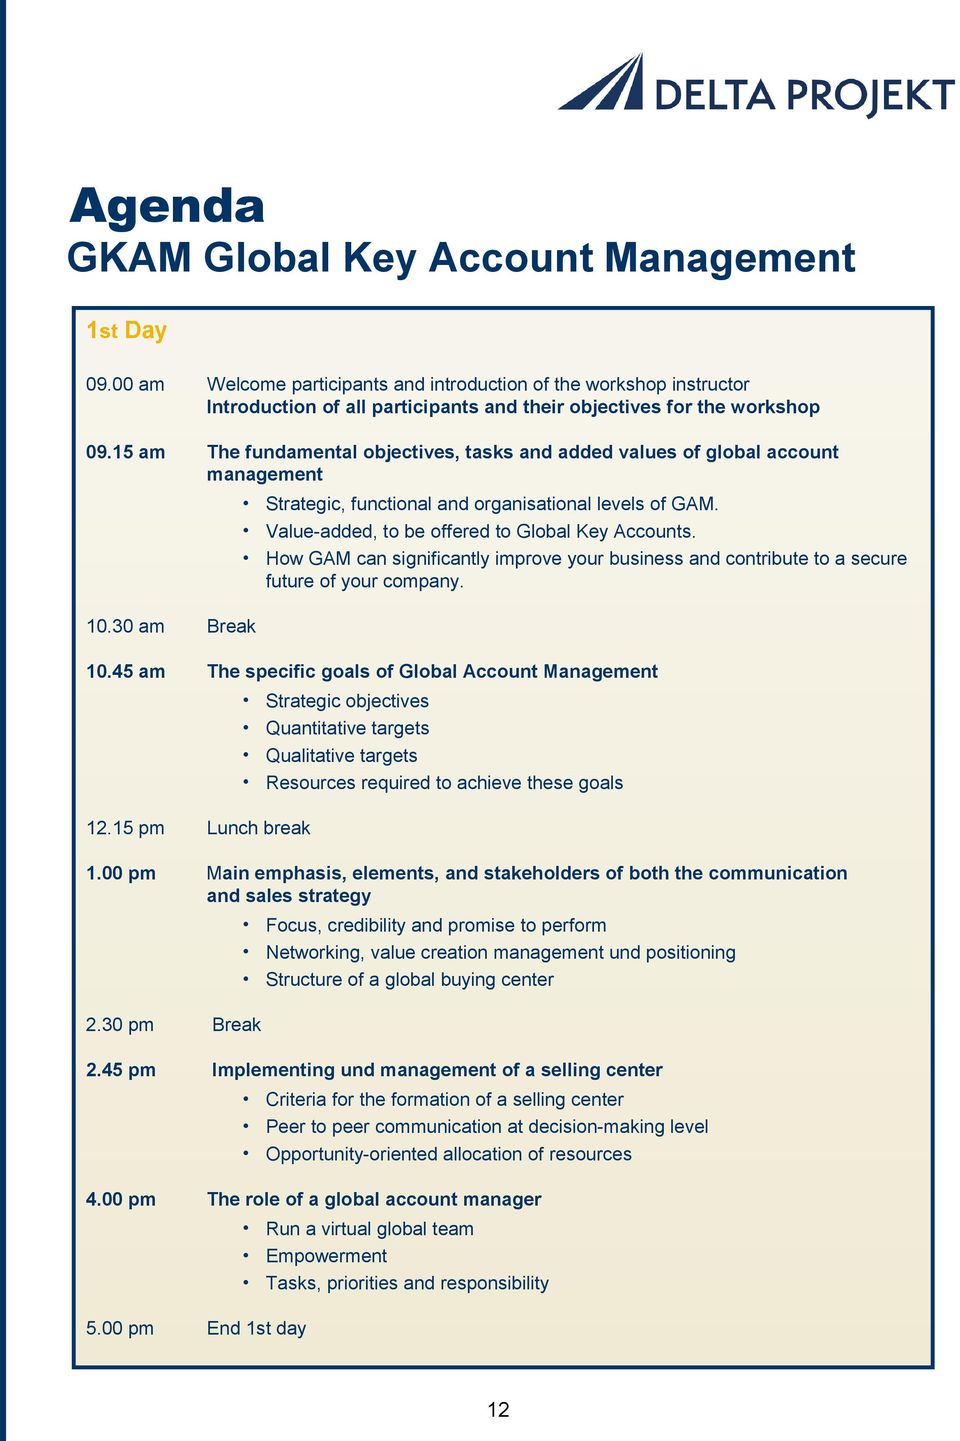 Value-added, to be offered to Global Key Accounts. How GAM can significantly improve your business and contribute to a secure future of your company. 10.